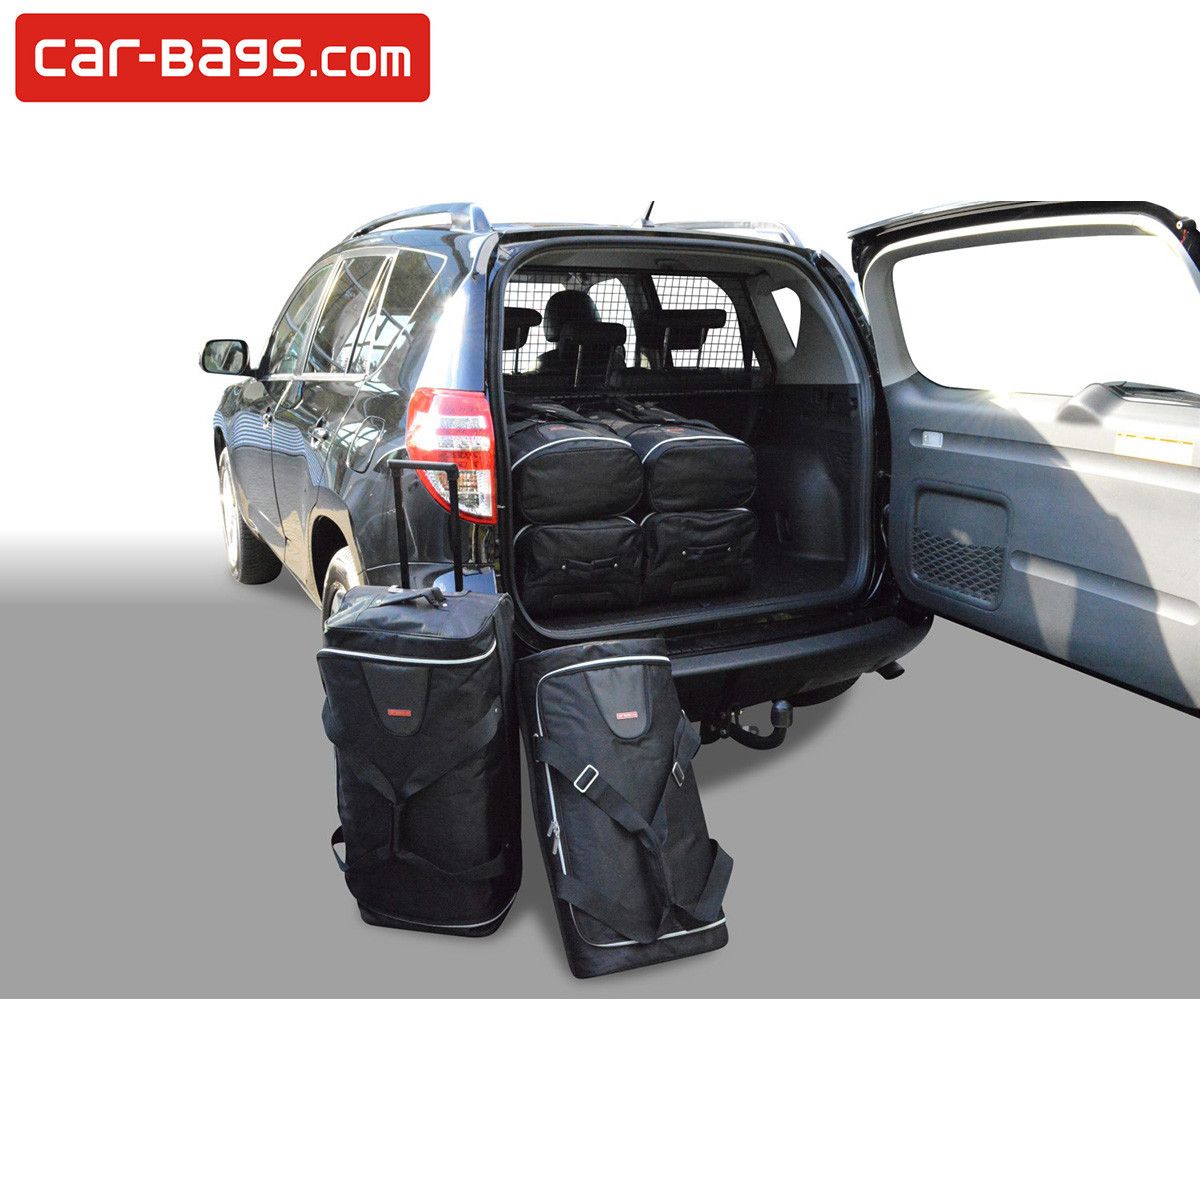 Travel bags | fit for $ 379 III Bags (6 tailor Toyota car pcs) covers Perfect Car Time space saving (XA30) and RAV4 fits | made for Covers | Shop